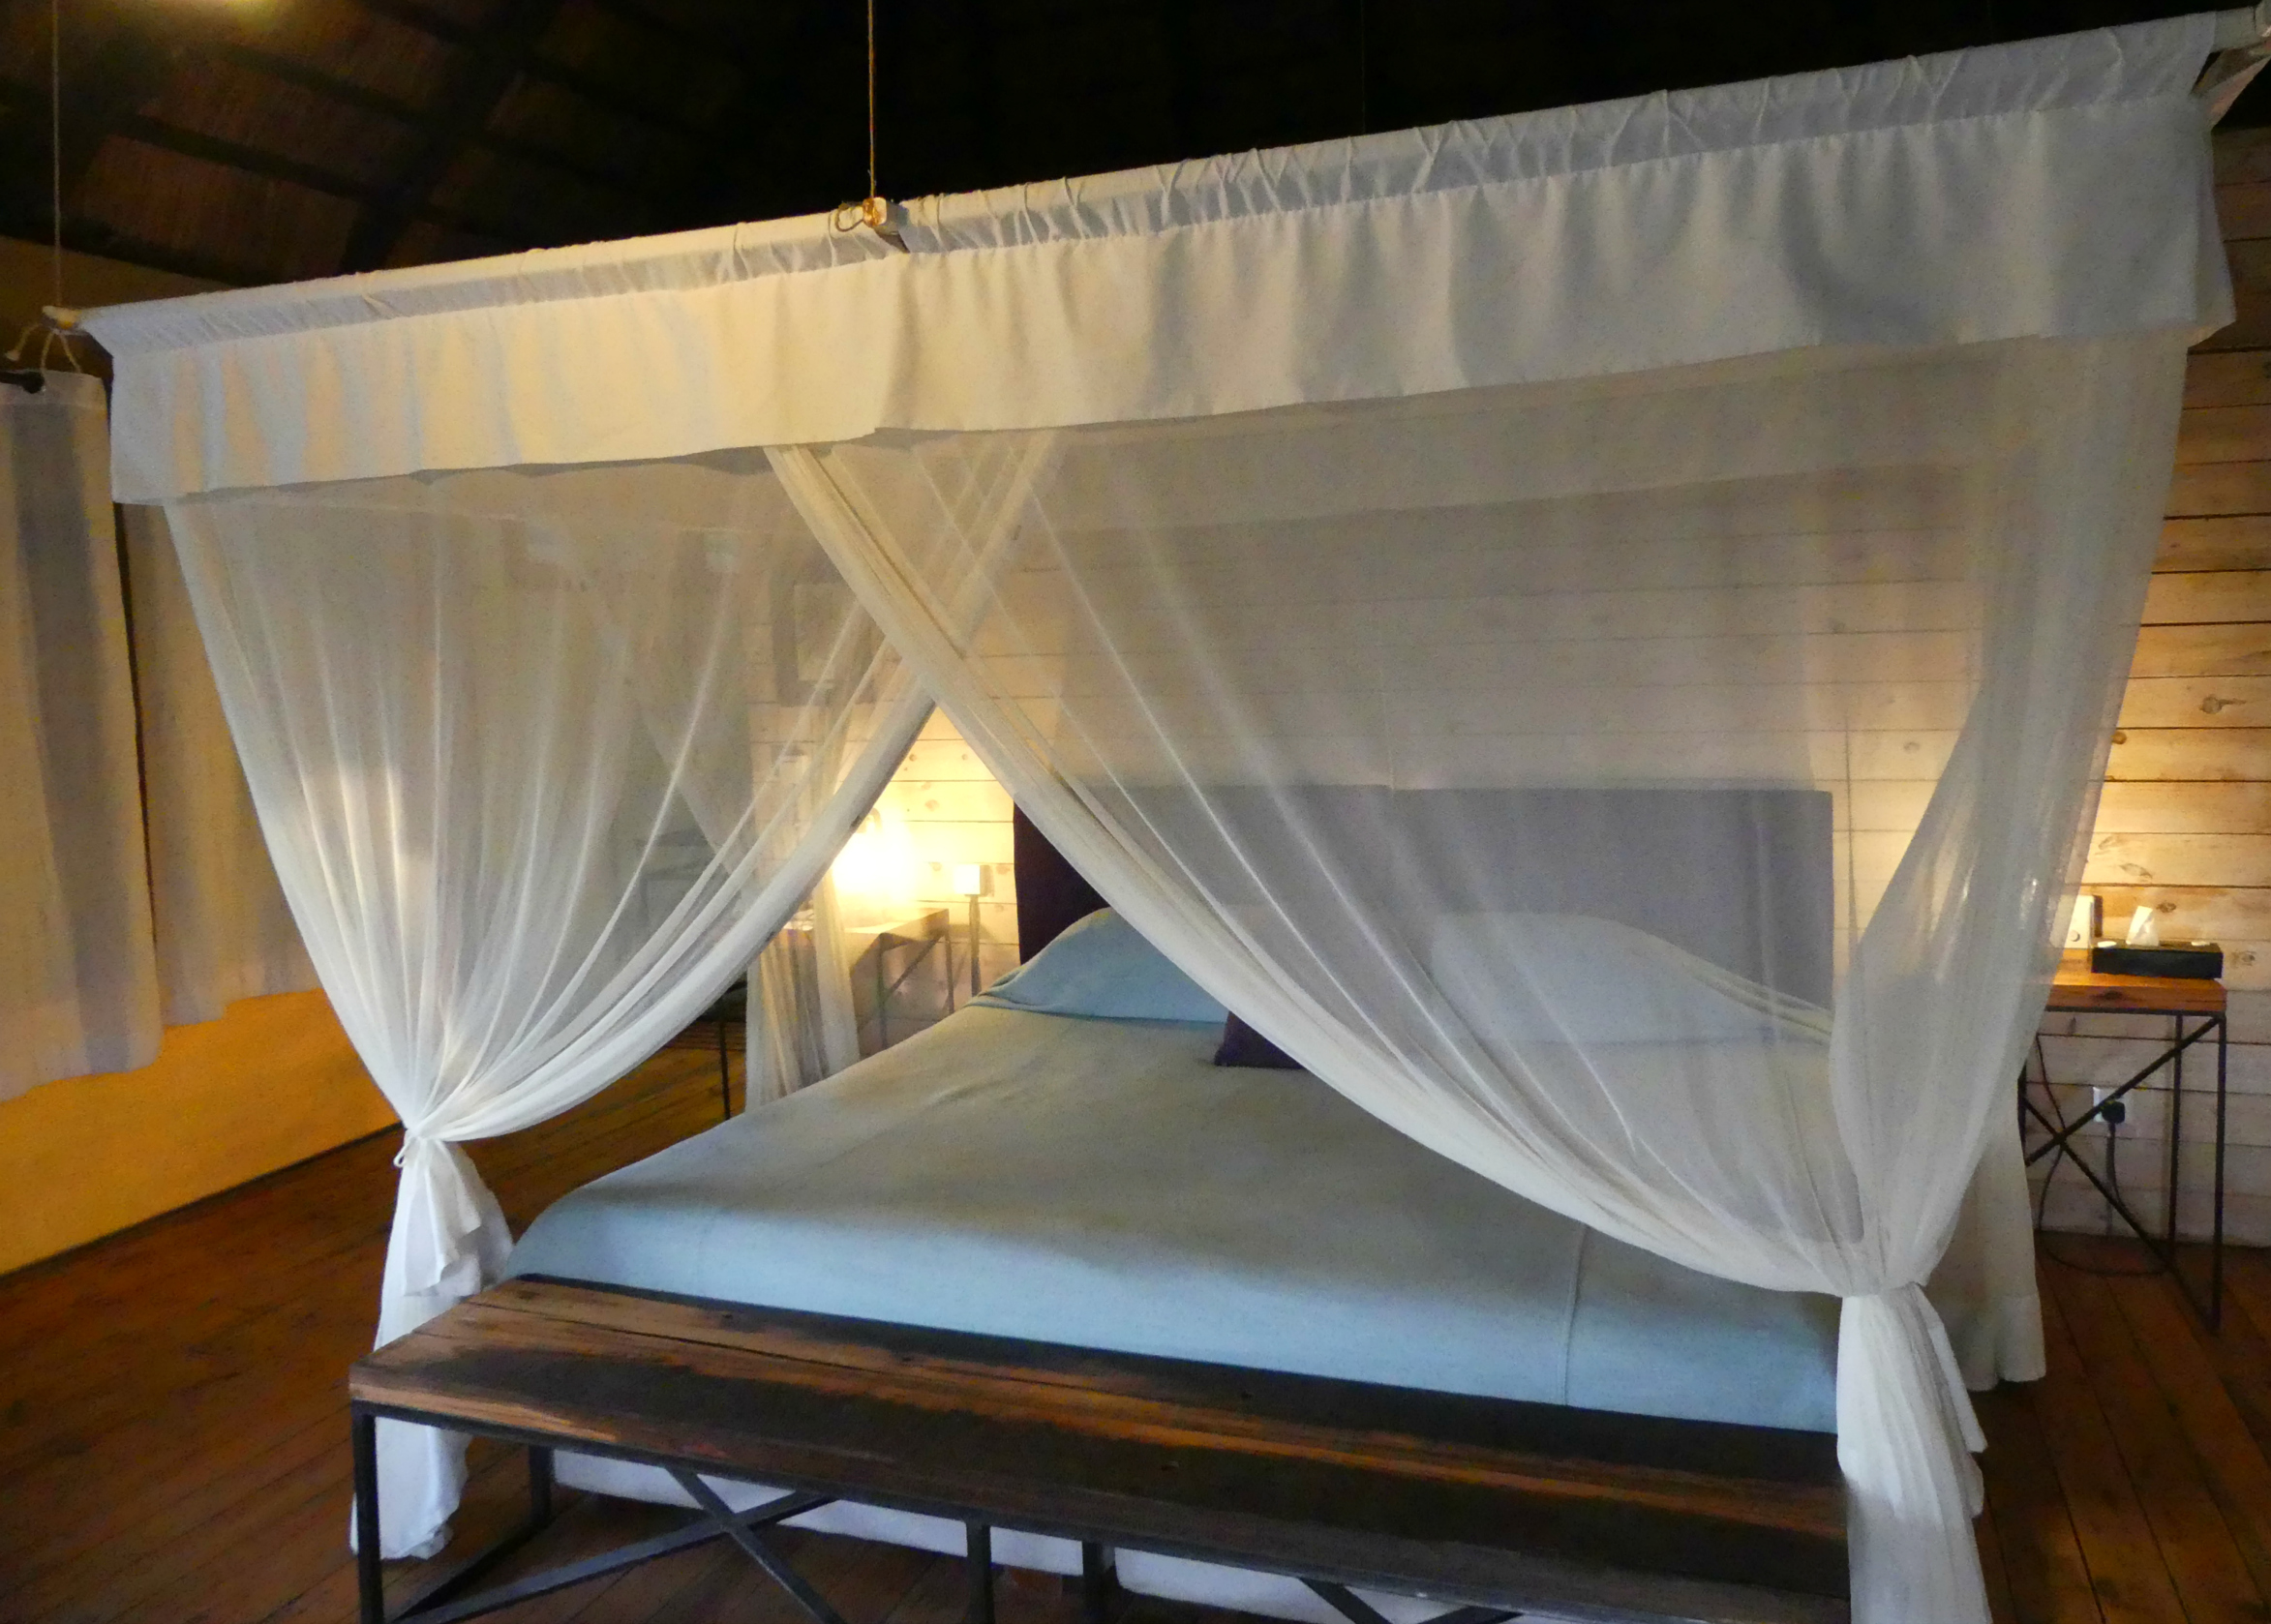 A comfortable bed to get into after a game drive and delicious dinner.